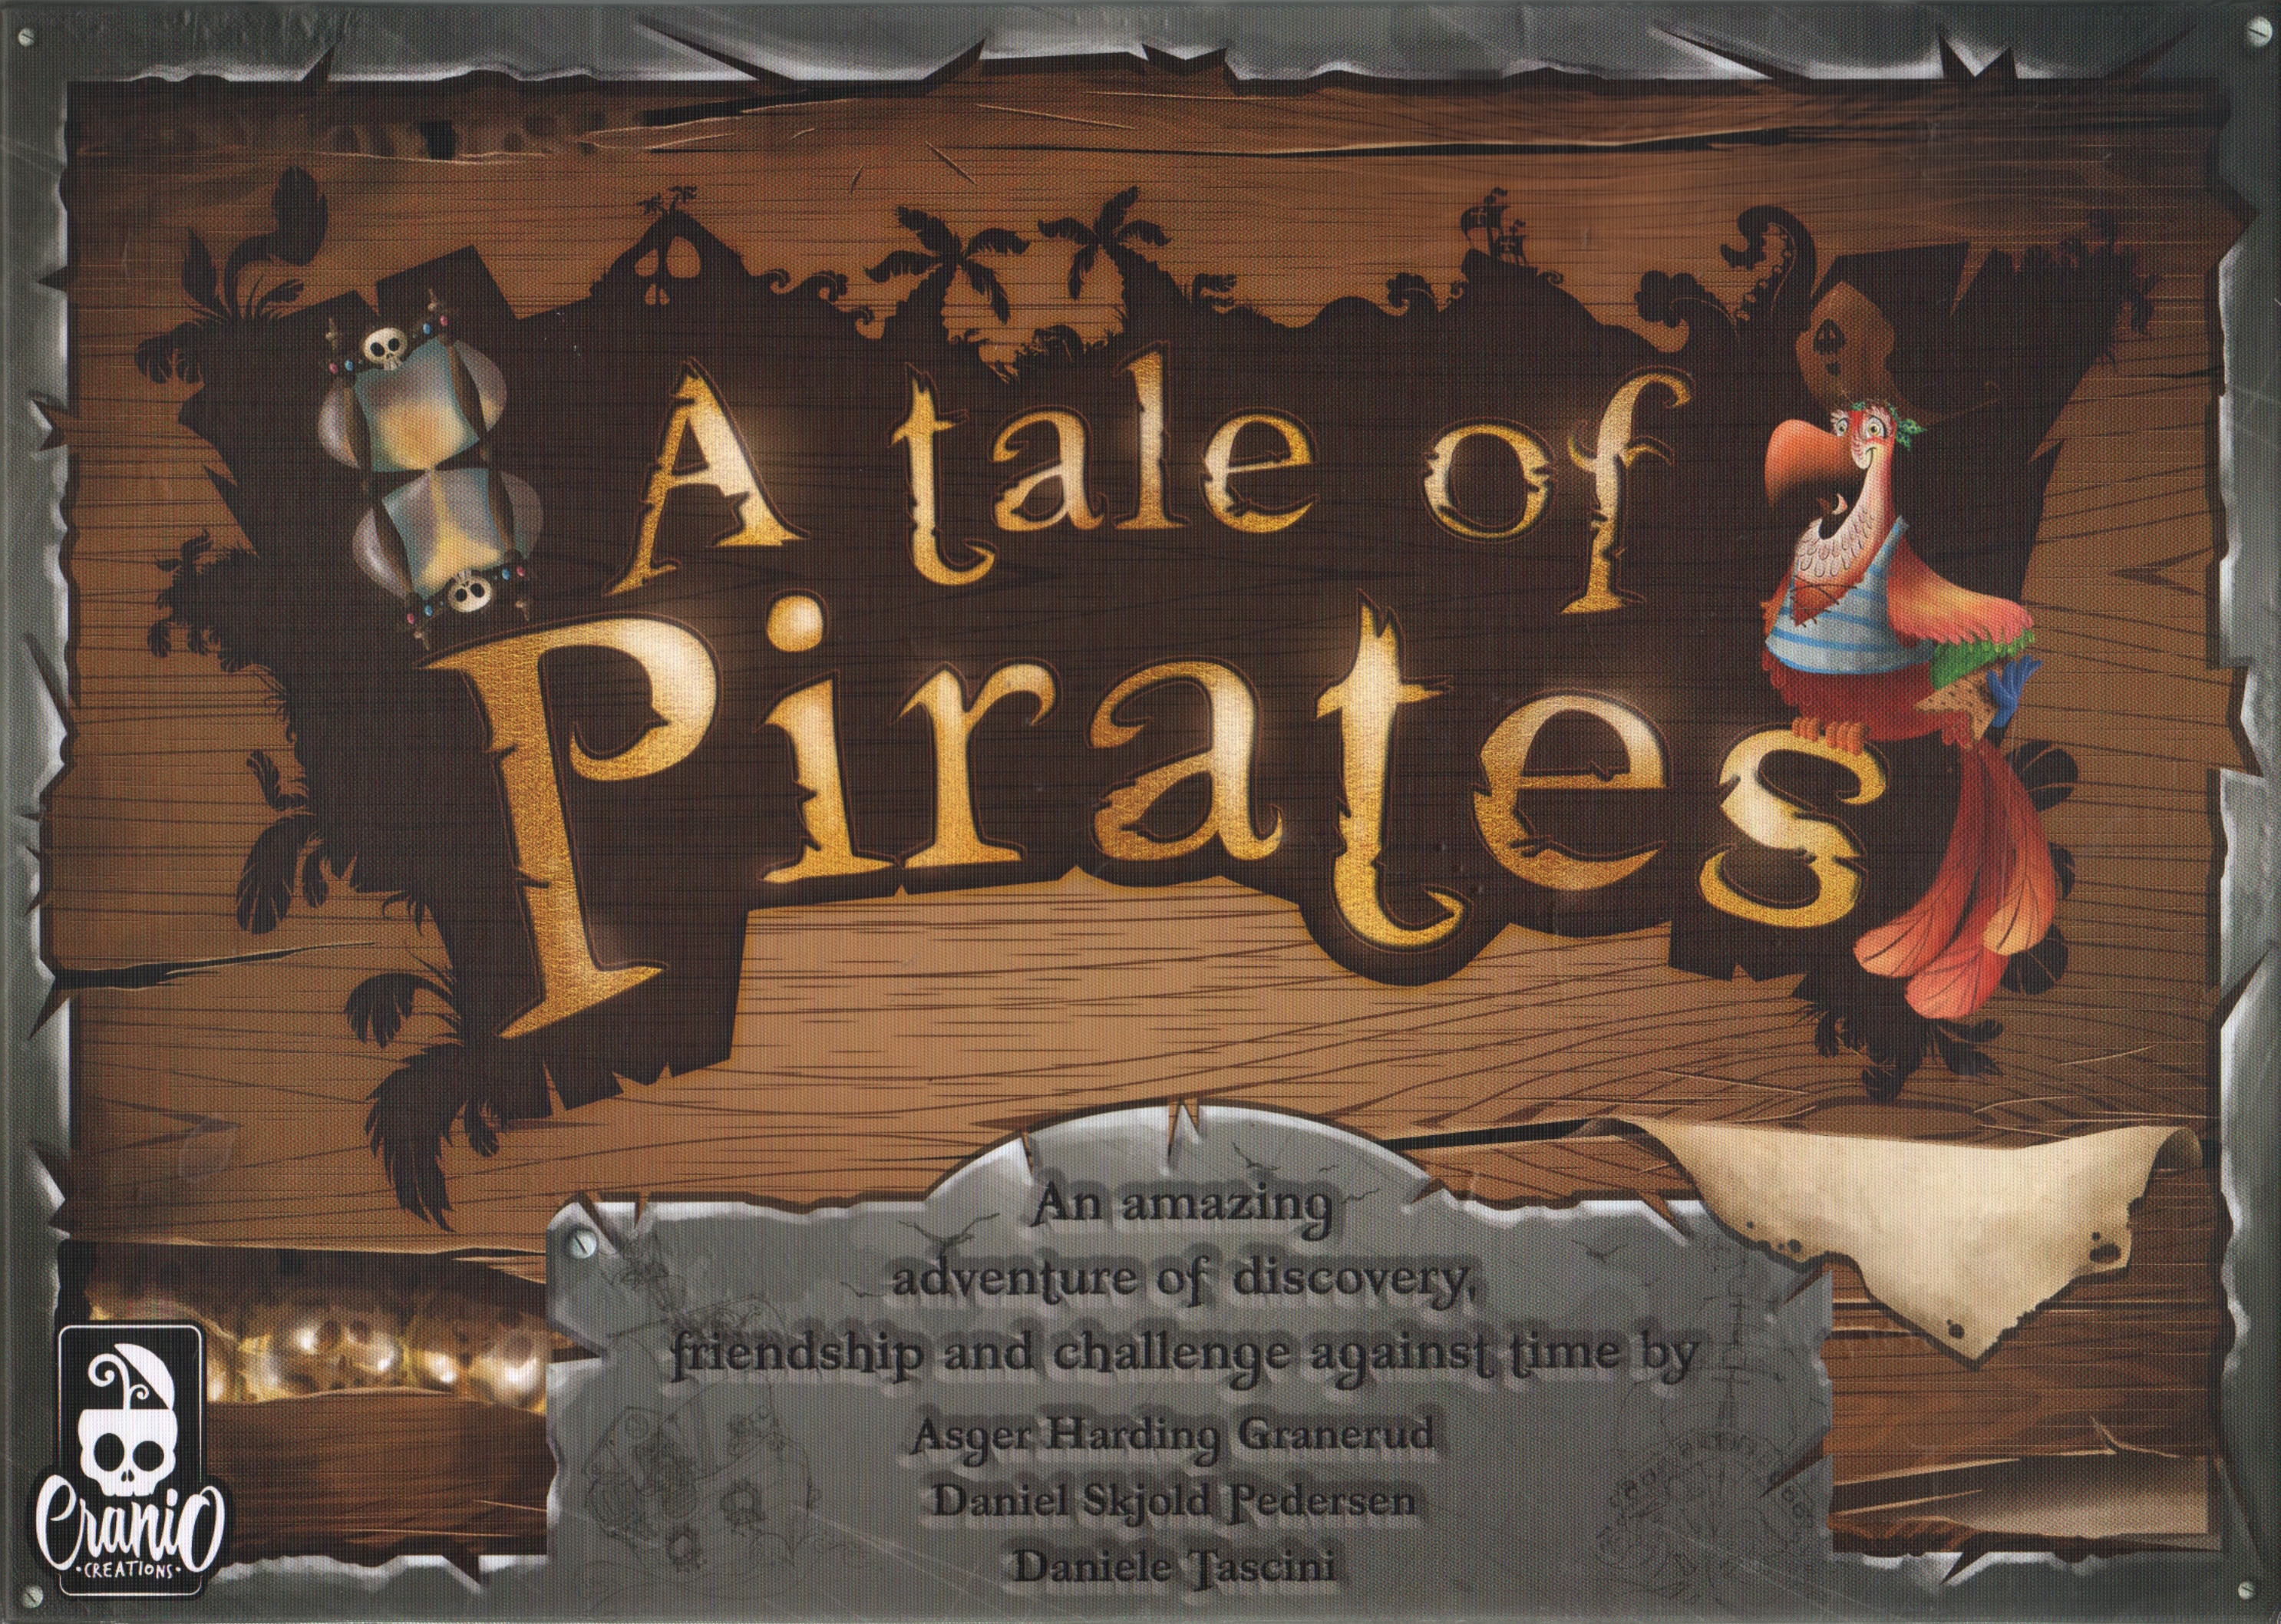 A tale of Pirates